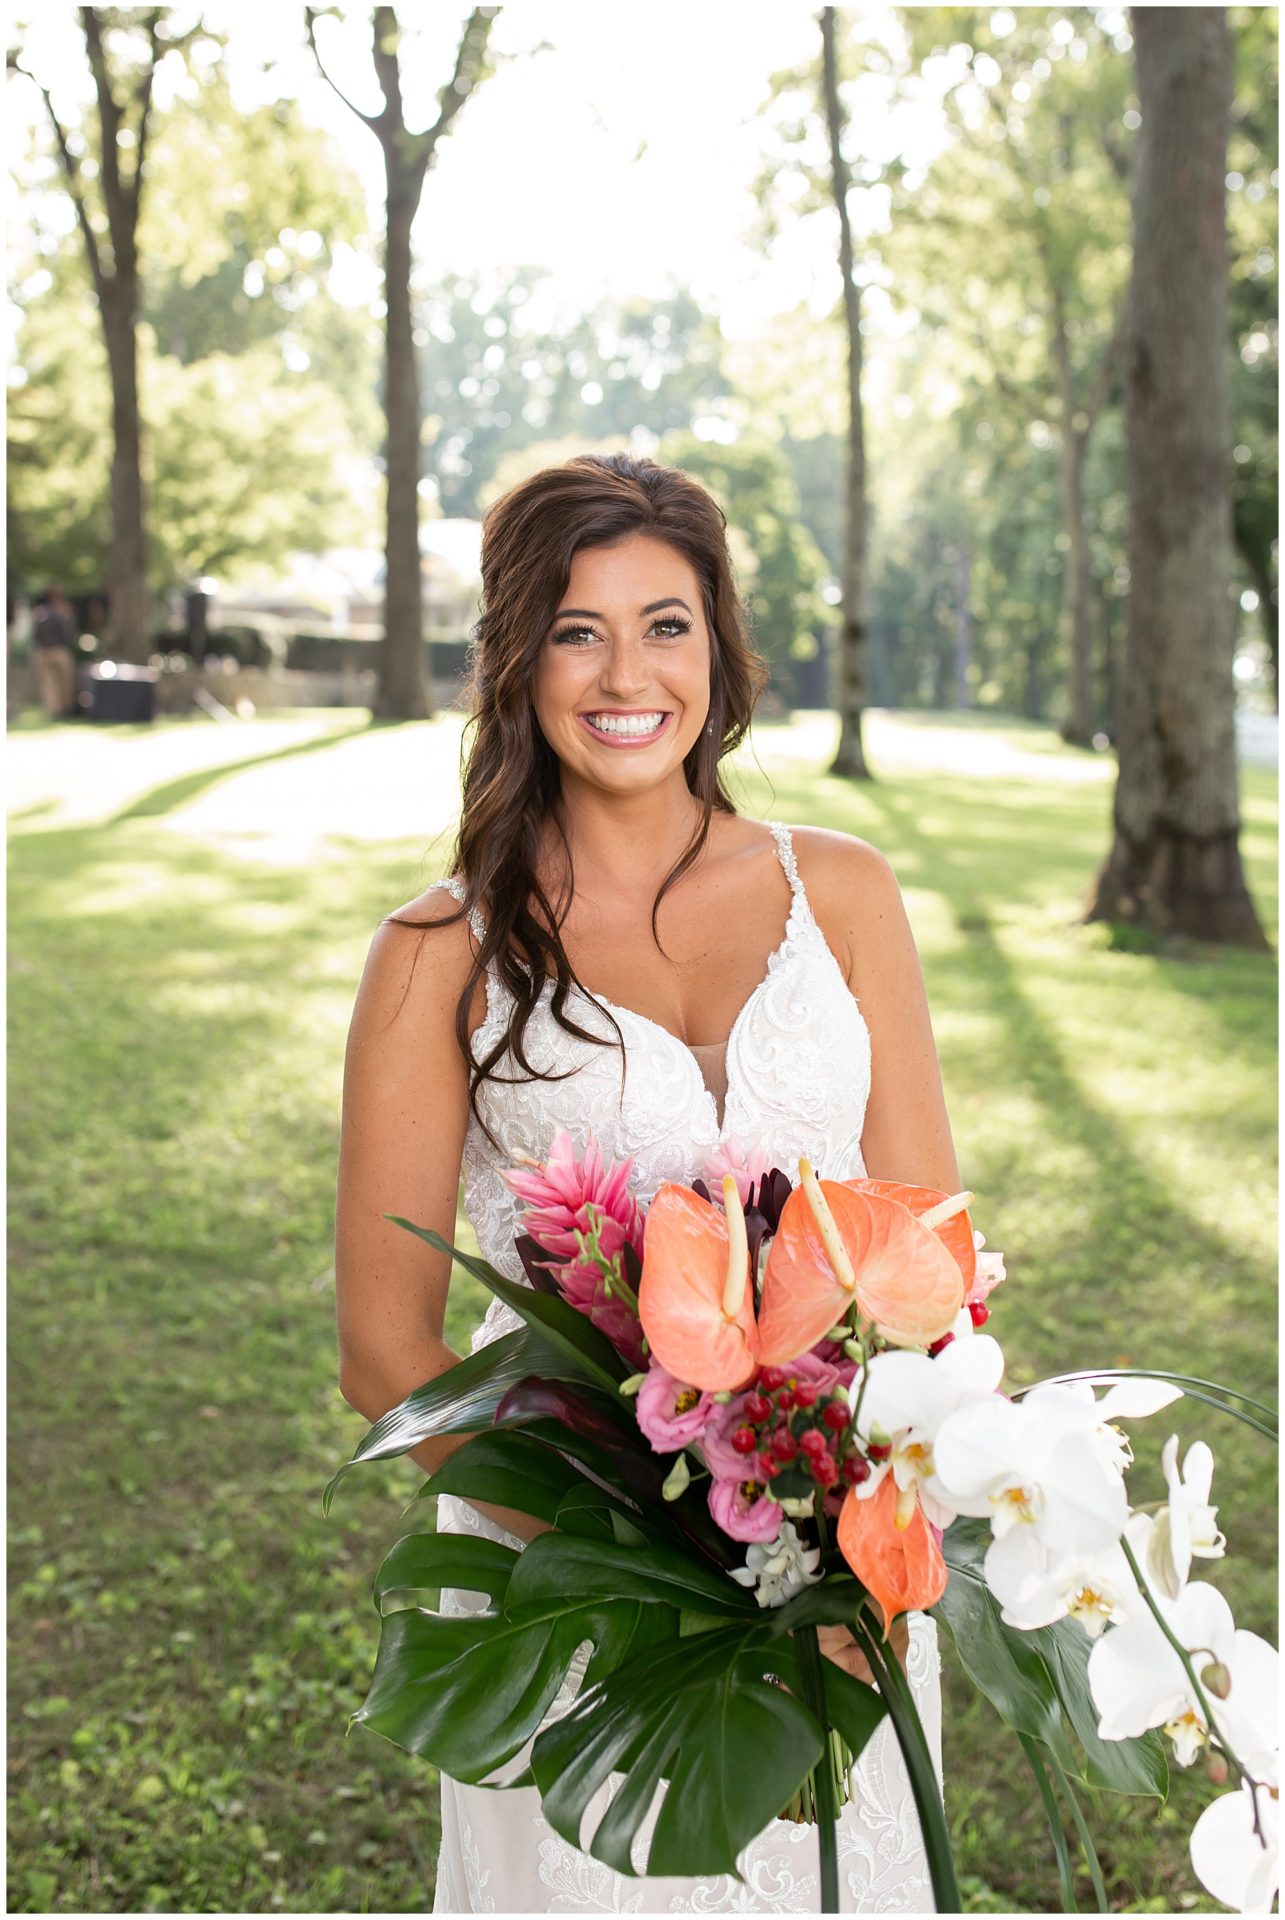 Beautiful Bridal portraits with a tropical bouquet at the wedding at The Estate at Cherokee Dock in Nashville